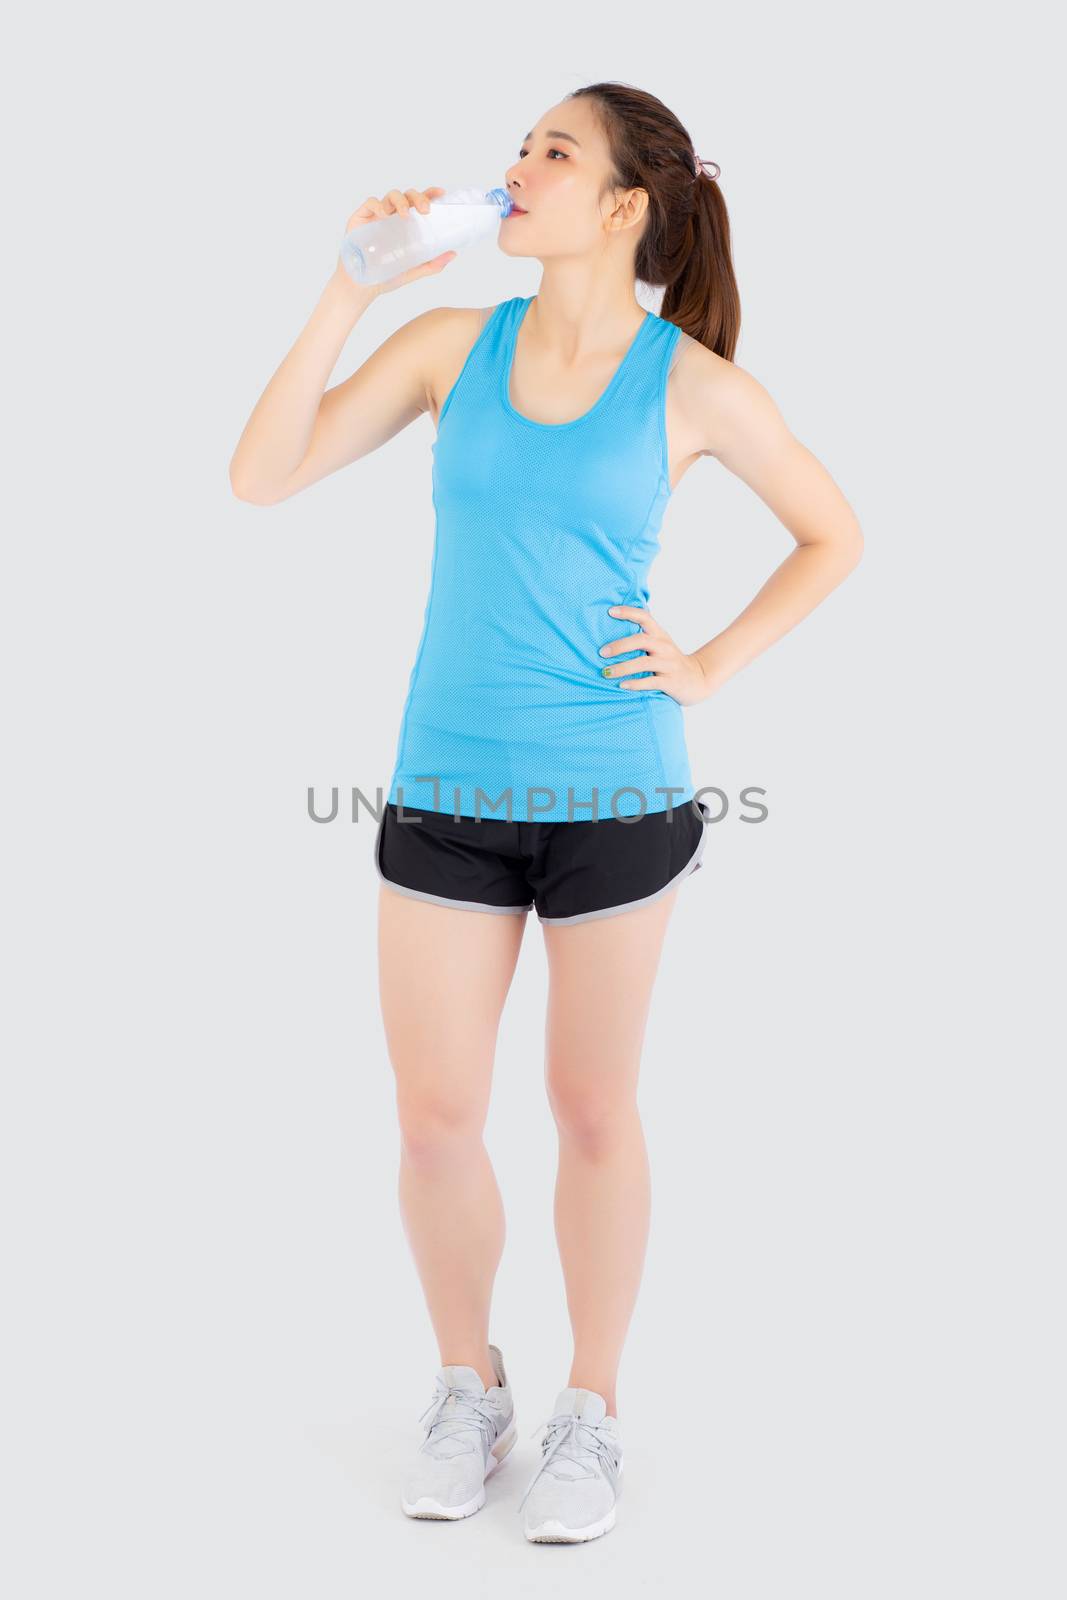 Beautiful young asian woman fit shape drinking water after workout and exercise isolated on white background, girl thirsty after aerobic tired for refresh, model fitness healthy and wellness concept.